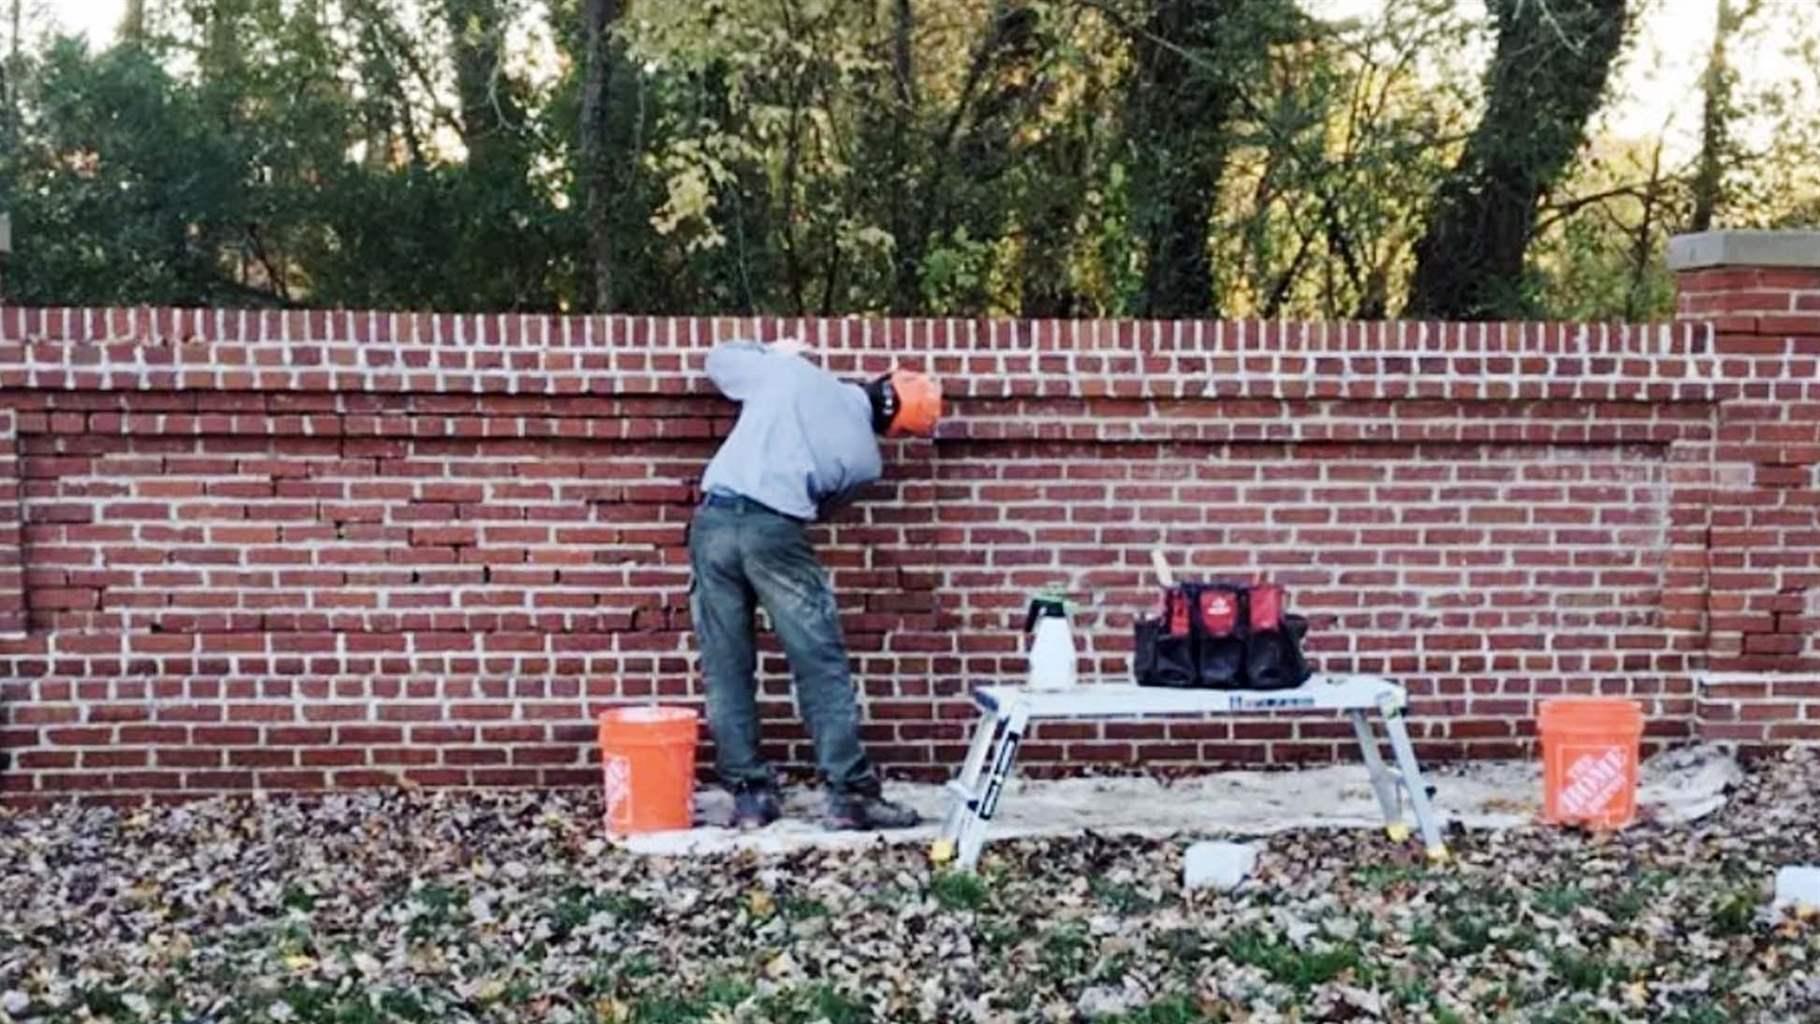 The Great American Outdoors Act has provided the National Park Service with the funding to make often-intricate repairs through development of a new program called Maintenance Action Teams, which are regionally based crews of masons and other artisans who work on sites such as Poplar Grove National Cemetery at Petersburg National Battlefield in Virginia. 